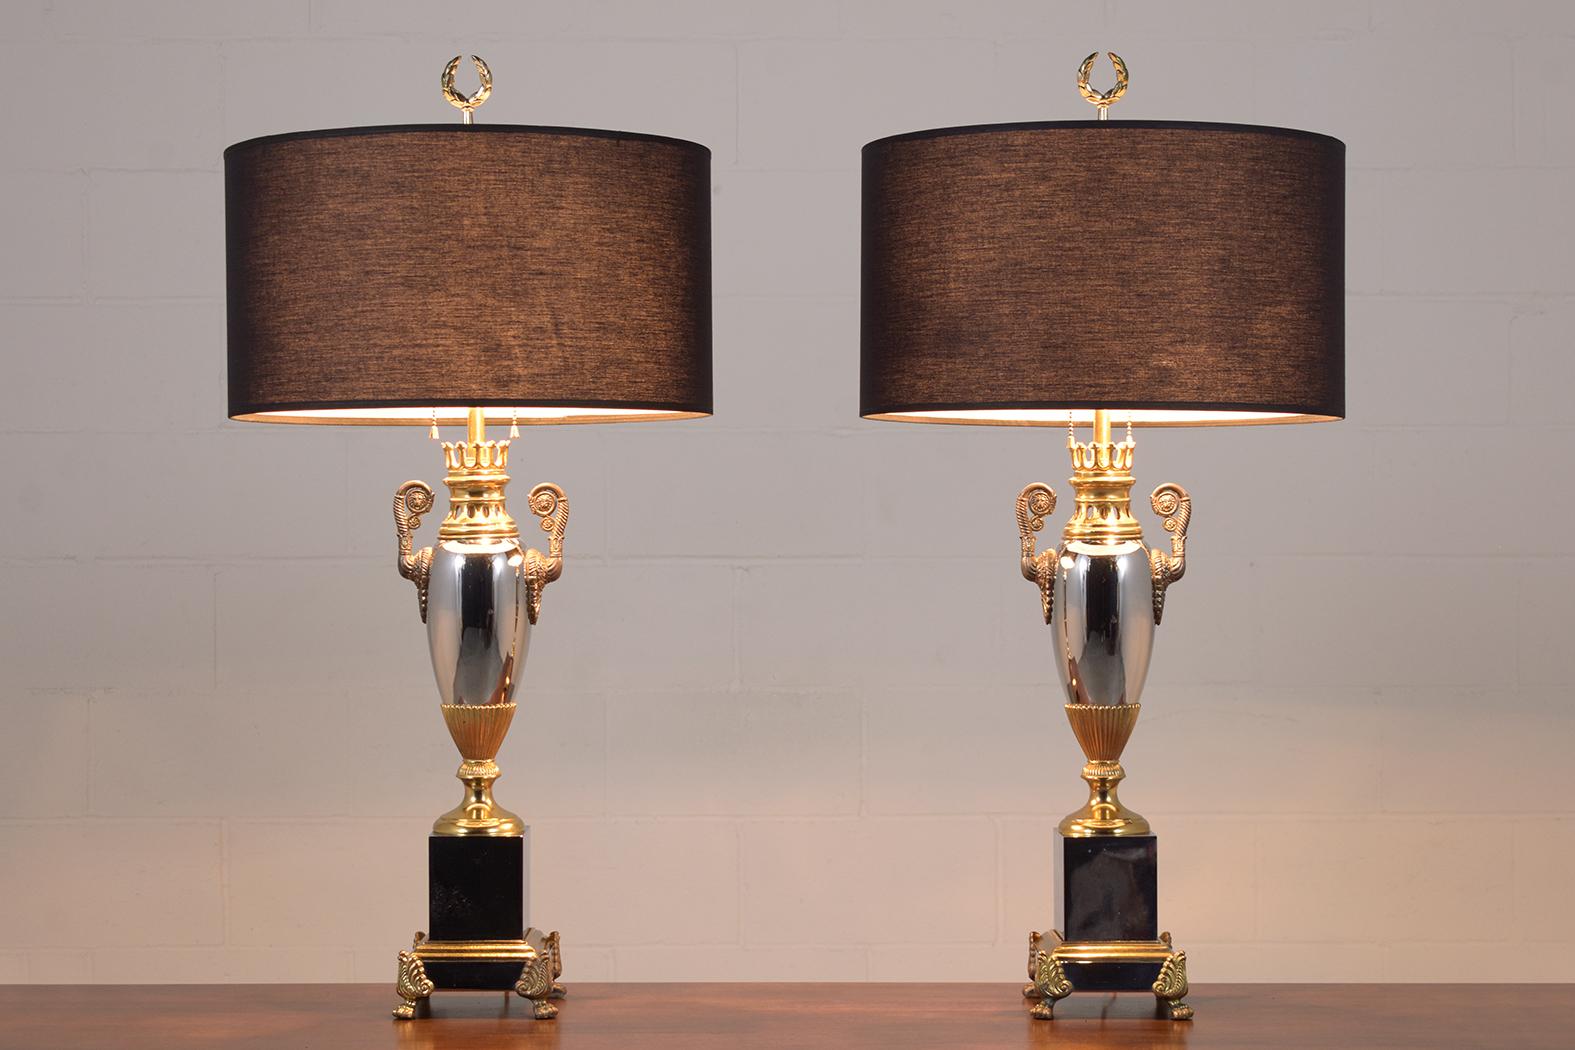 Dive into the elegance of the 1950s with our stunning pair of Regency-style table lamps. Meticulously handcrafted from metal, these lamps are finished in a harmonious blend of plated silver and gold, reflecting their vintage charm in great